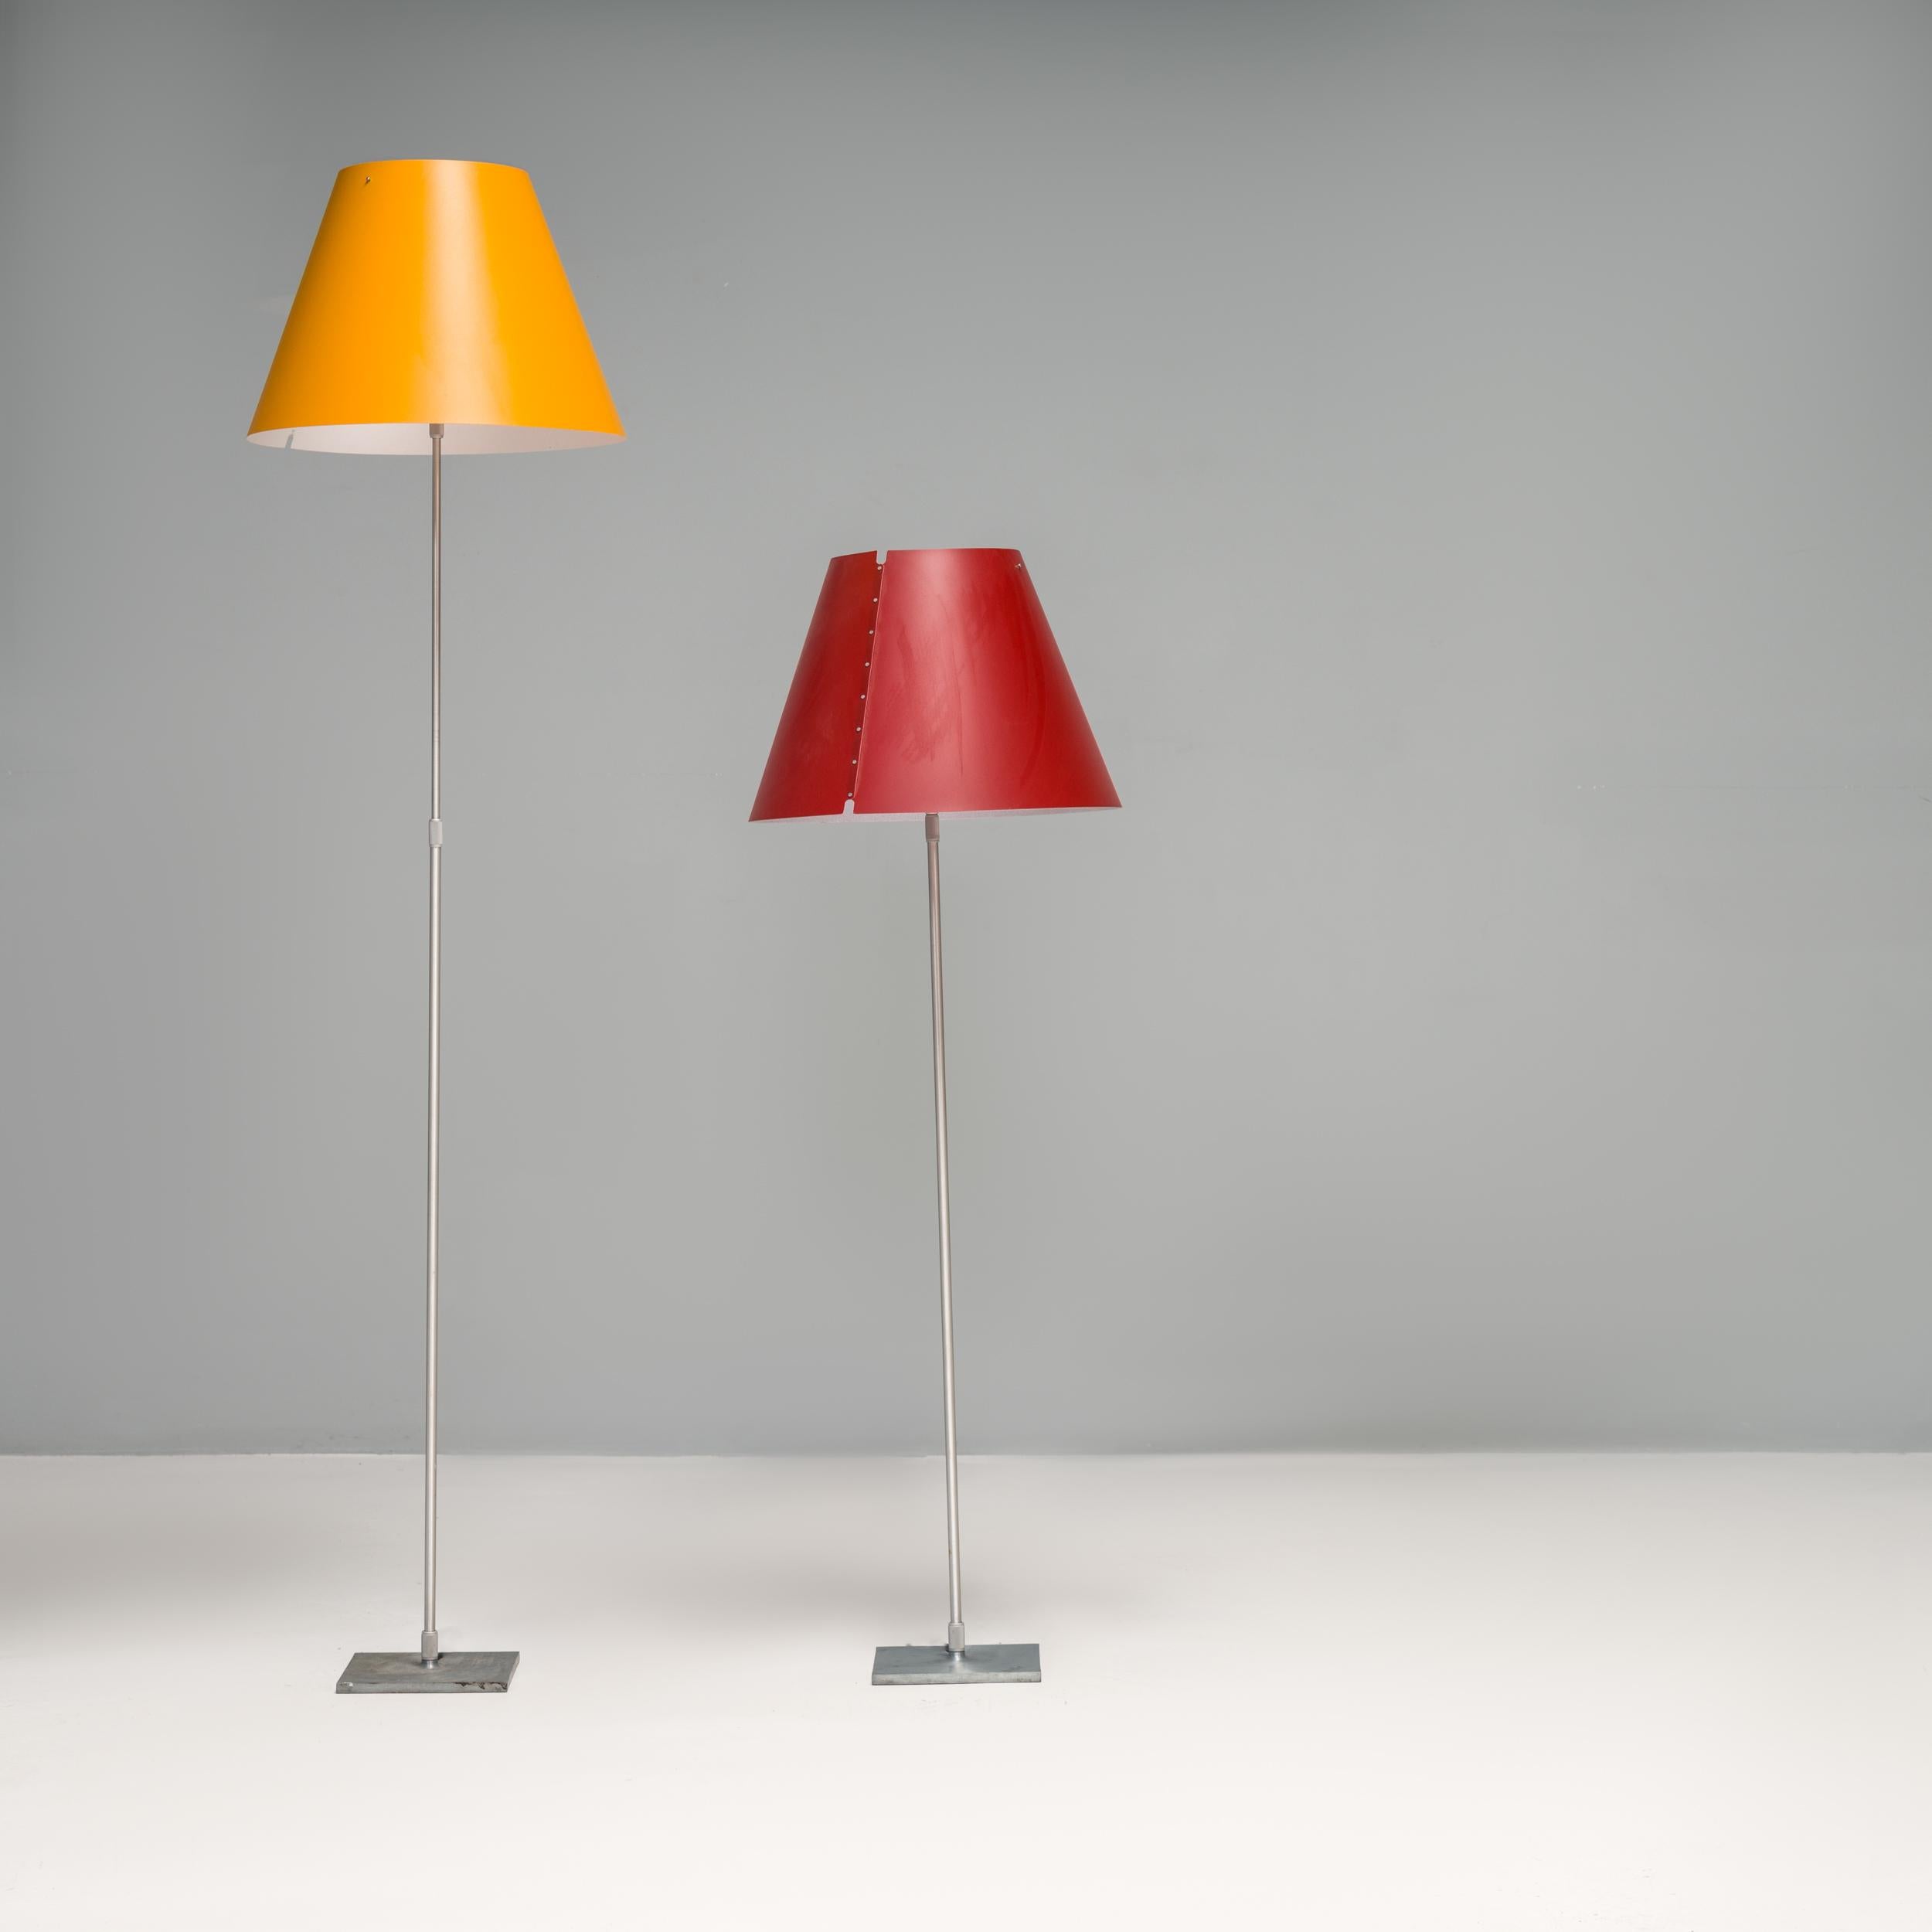 Originally designed by Paolo Rizzatto in 1986, the Constanza floor lamp is a fantastic example of post modern Italian design.

This pair of floor lamps feature the interchangeable polycarbonate silkscreened shades, one in smart yellow and one in